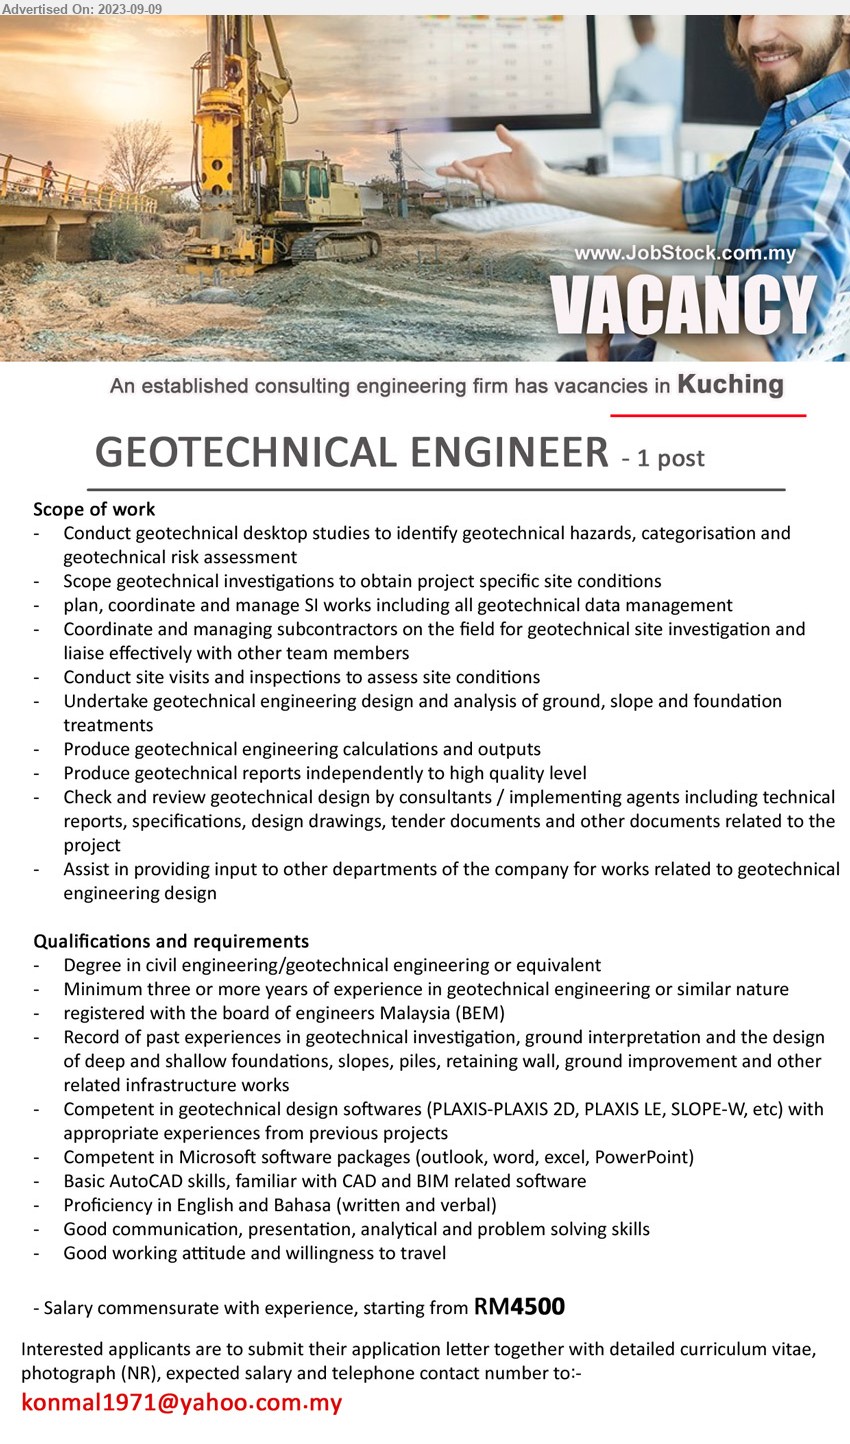 ADVERTISER (Consulting Engineering Firm) - GEOTECHNICAL ENGINEER (Kuching), 1 post, starting from RM4500, Degree in civil engineering/geotechnical engineering ...
Email resume to ...